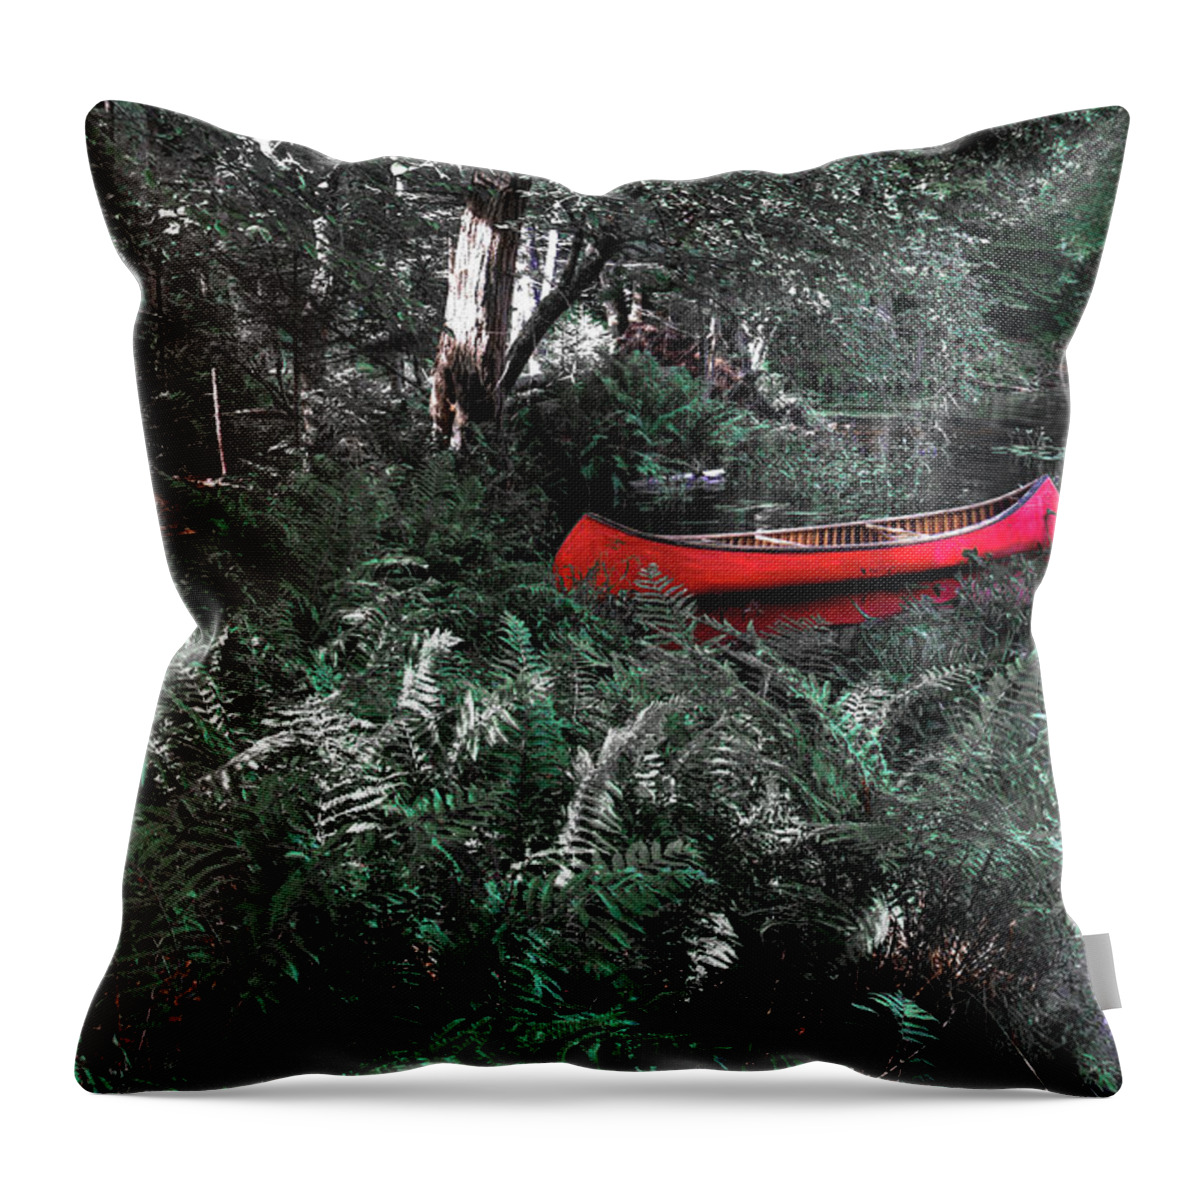 Secluded Spot Throw Pillow featuring the photograph Secluded Spot by David Patterson